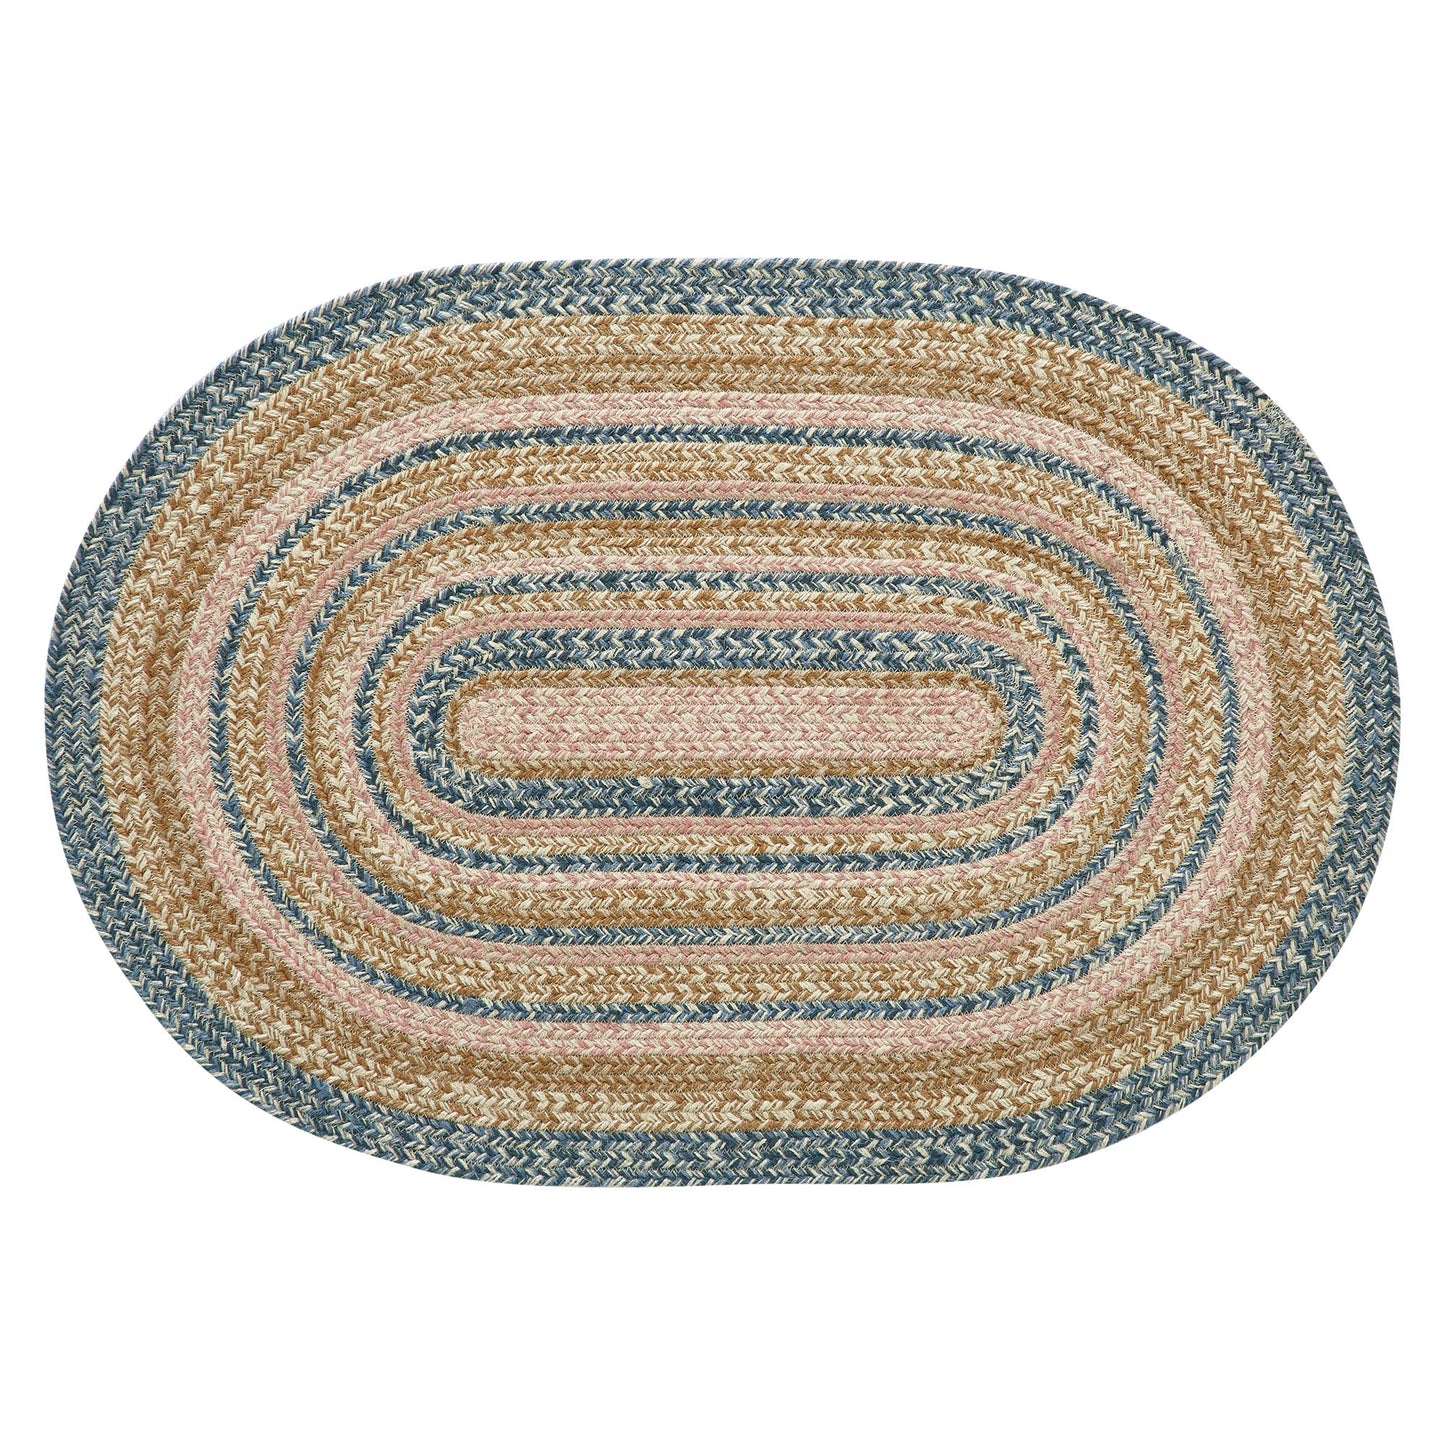 oval braided rug with colors of blue, gold, pink, and cream. 